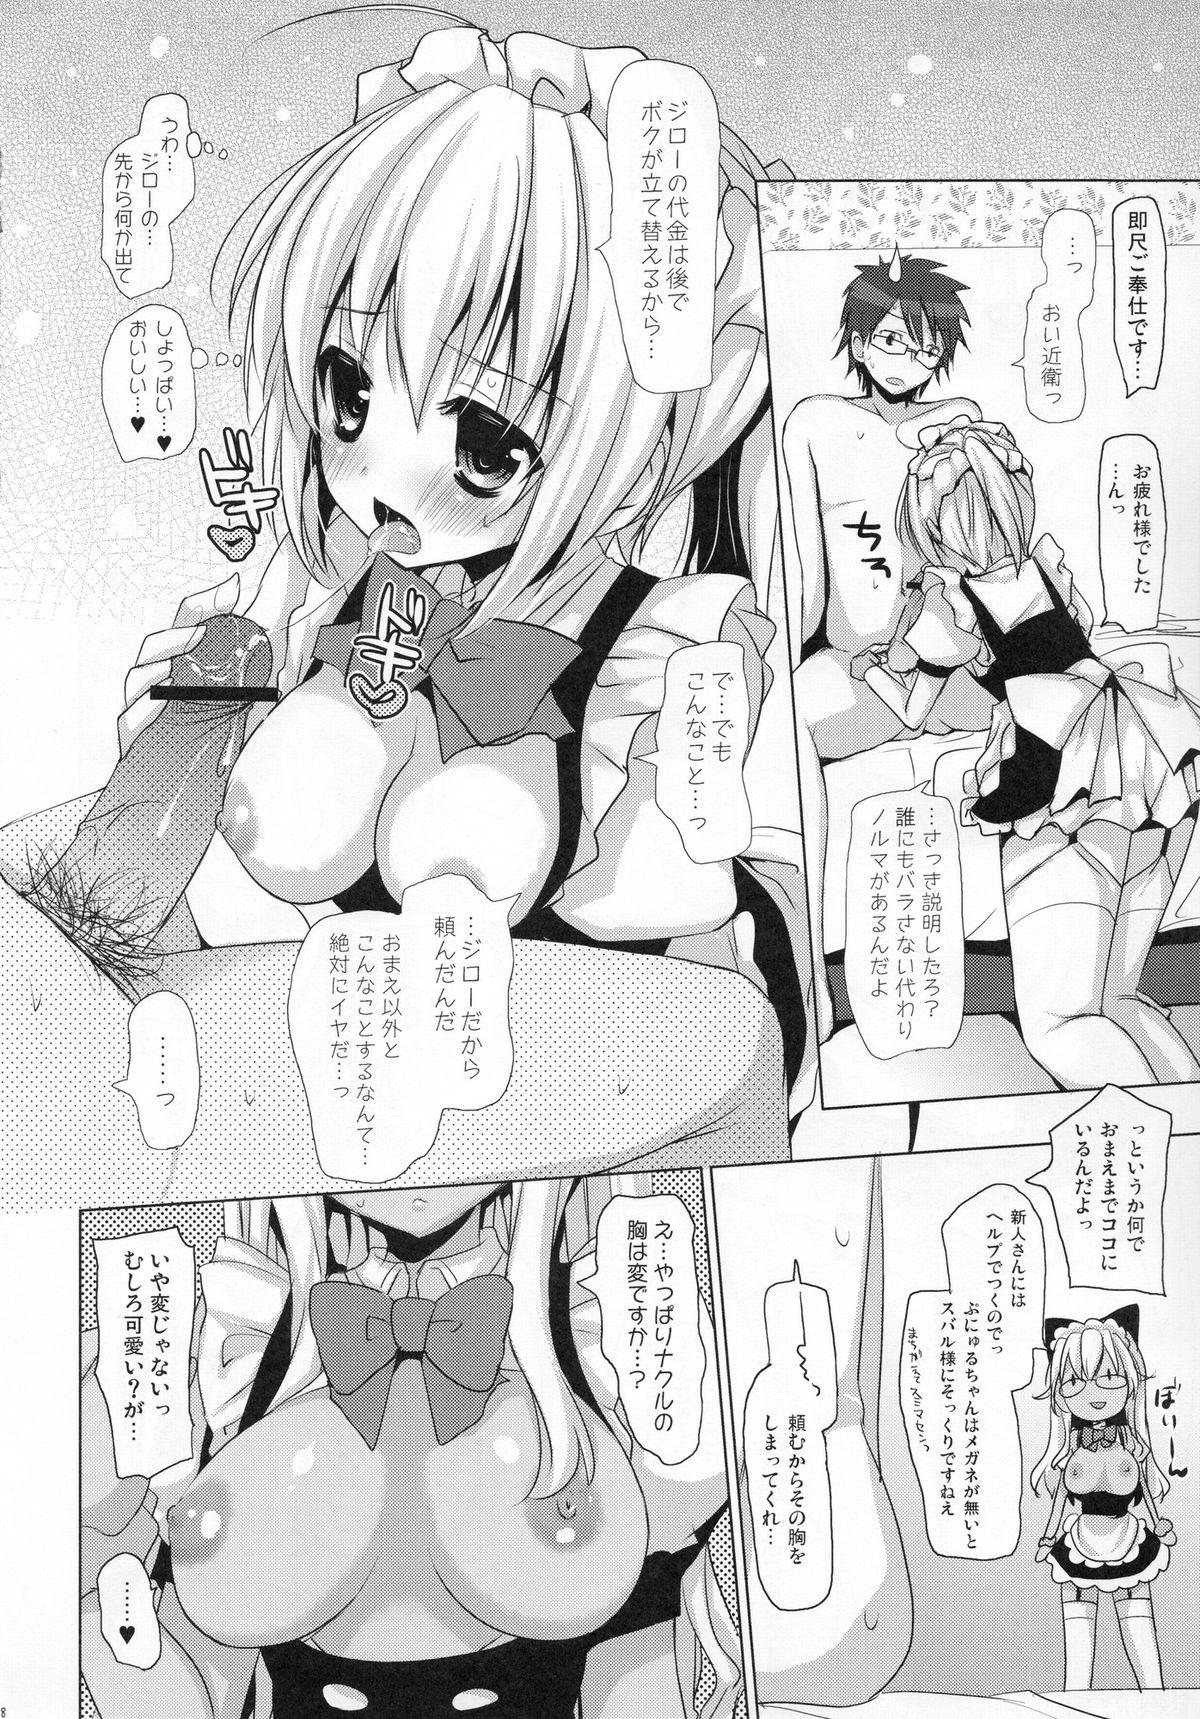 Missionary Position Porn Chicken Maid Party - Mayo chiki Africa - Page 10